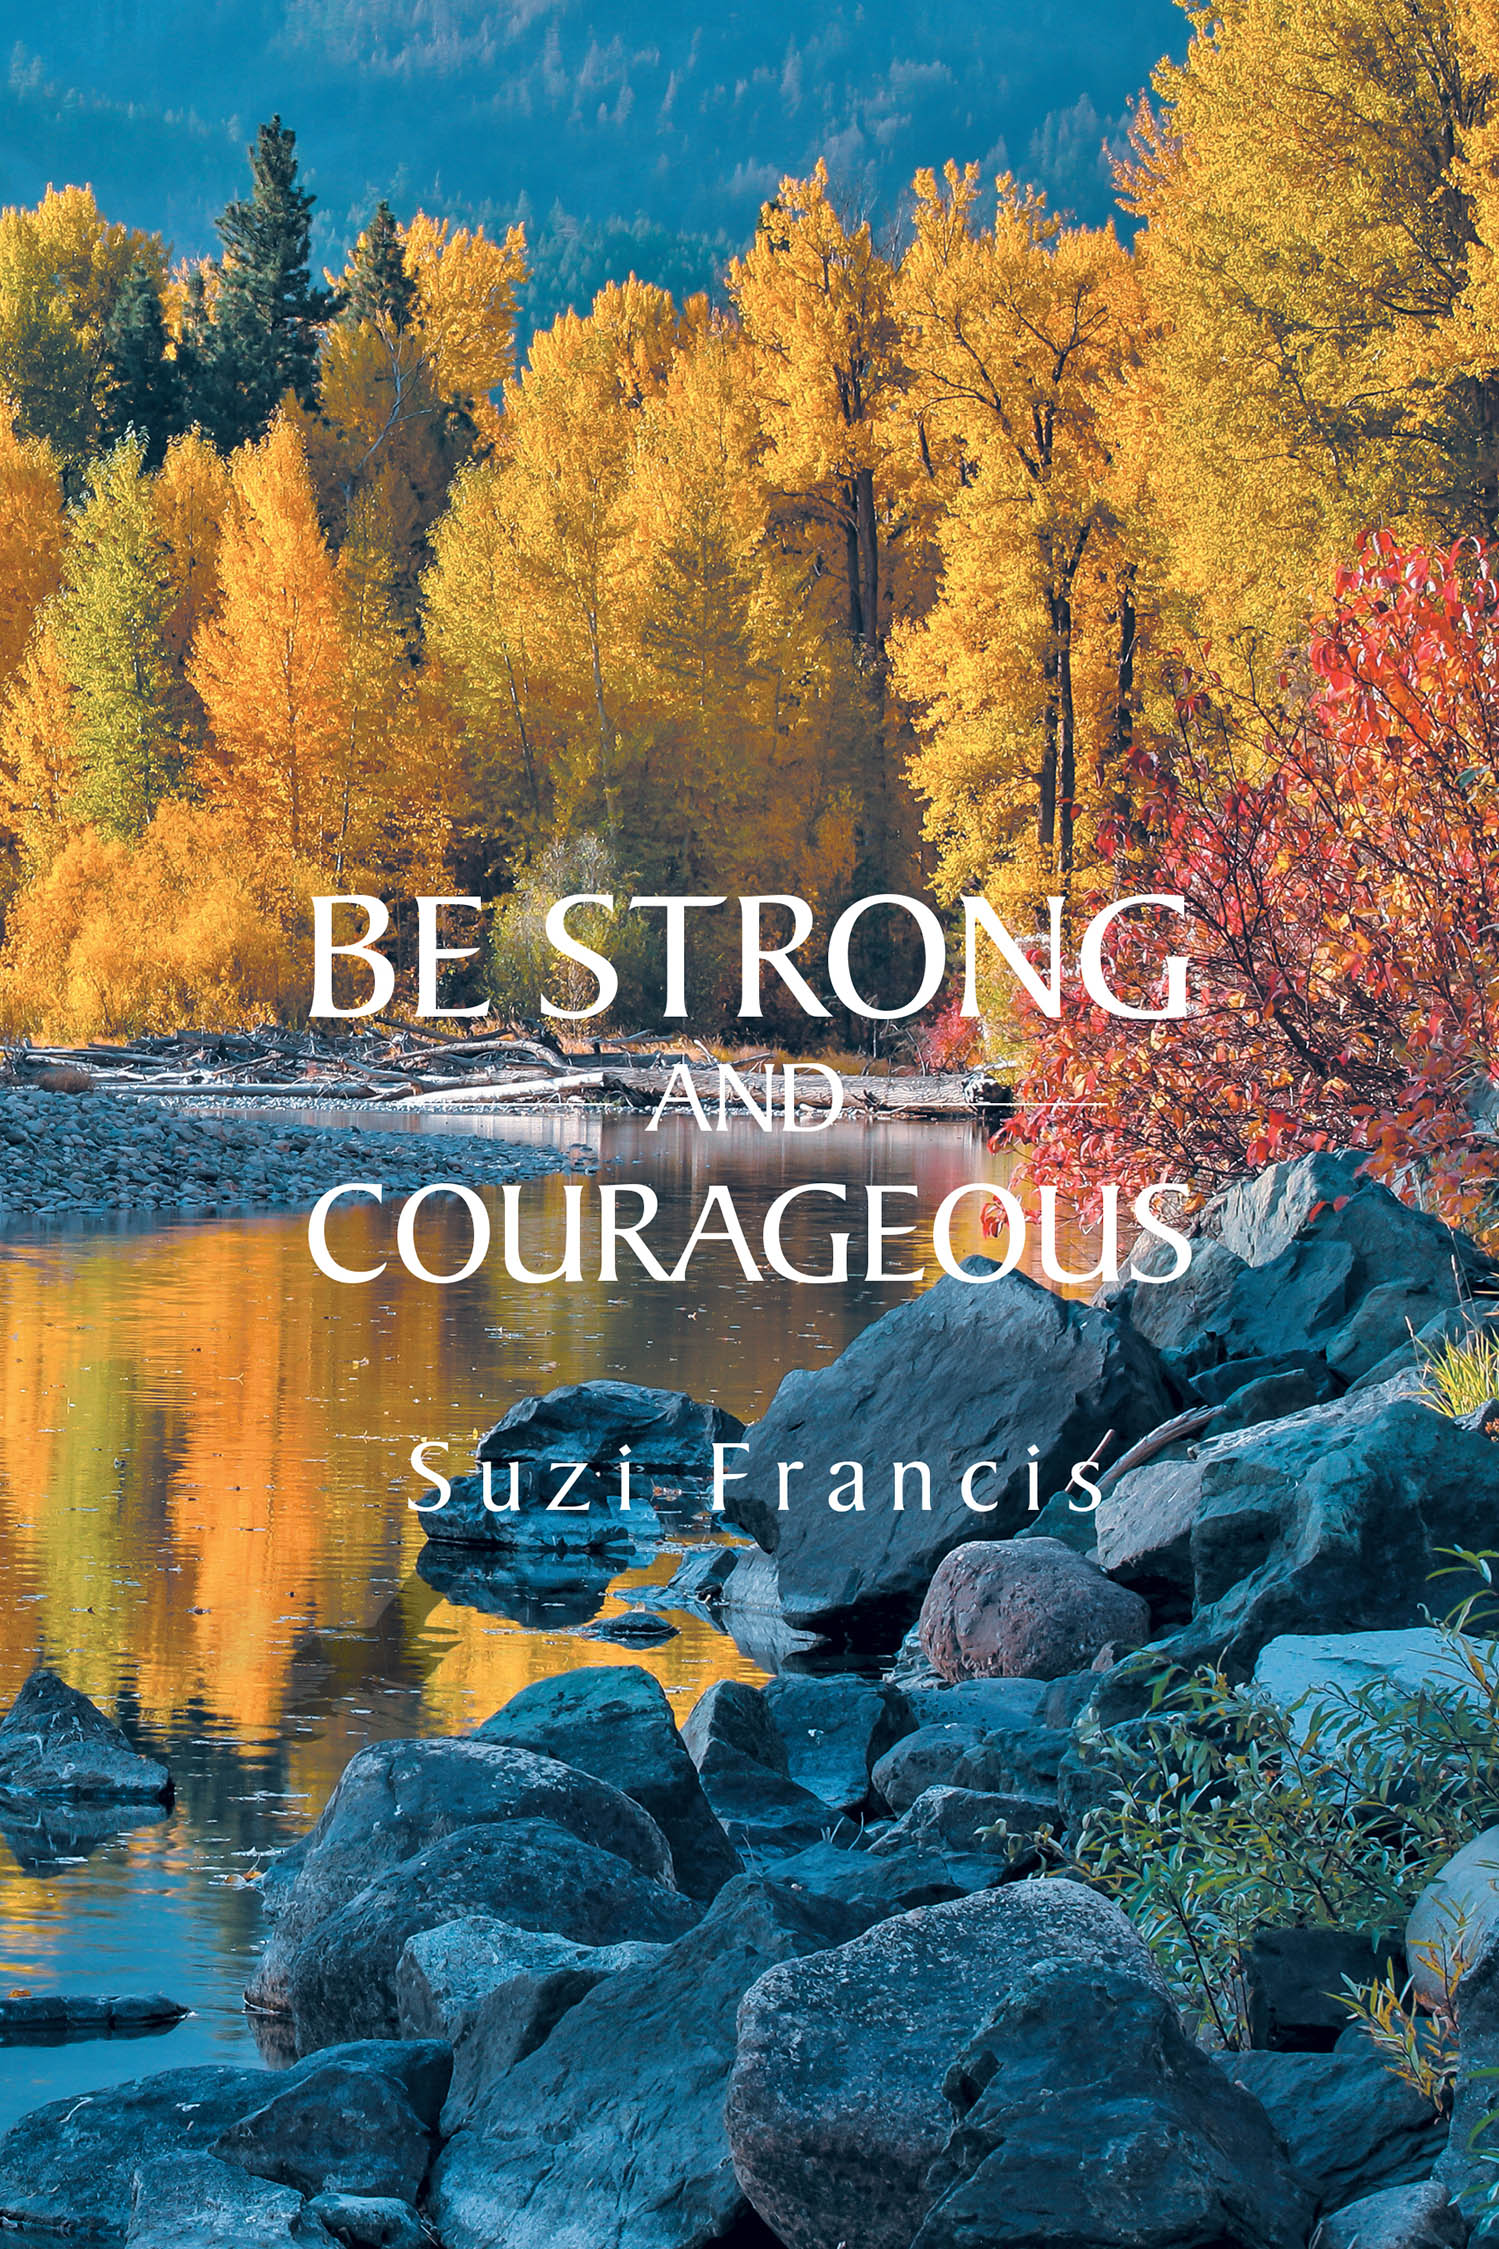 Suzi Francis’s Newly Released "Be Strong and Courageous" is an Inspirational Tale of Love and Redemption